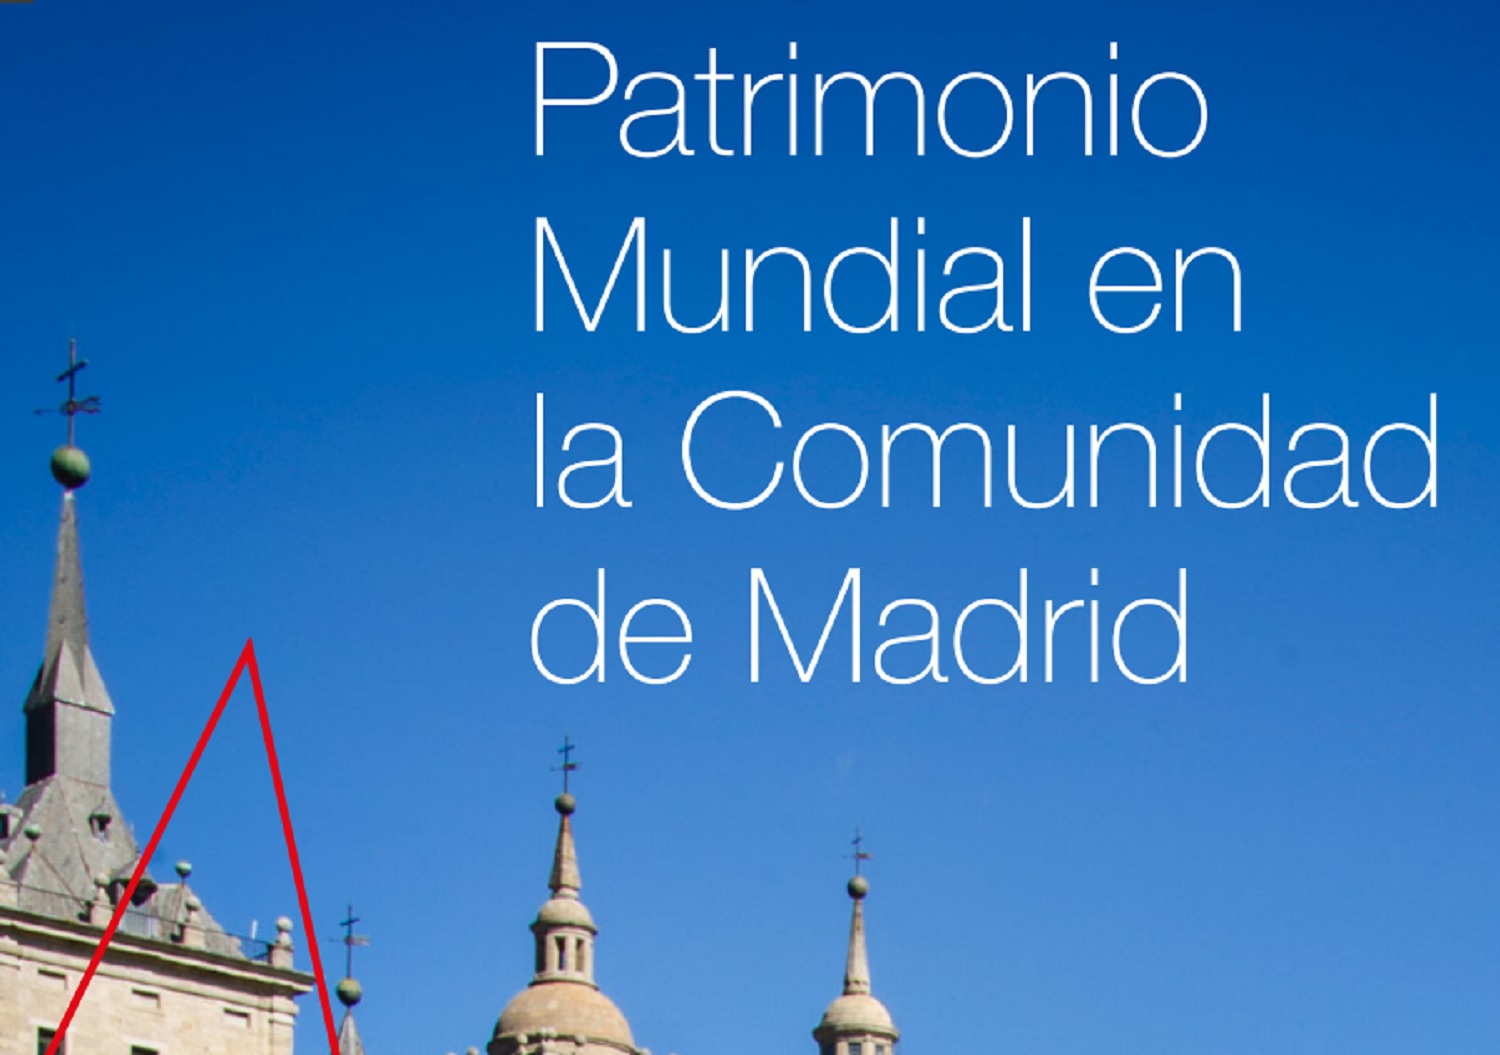 World Heritage in the region of Madrid